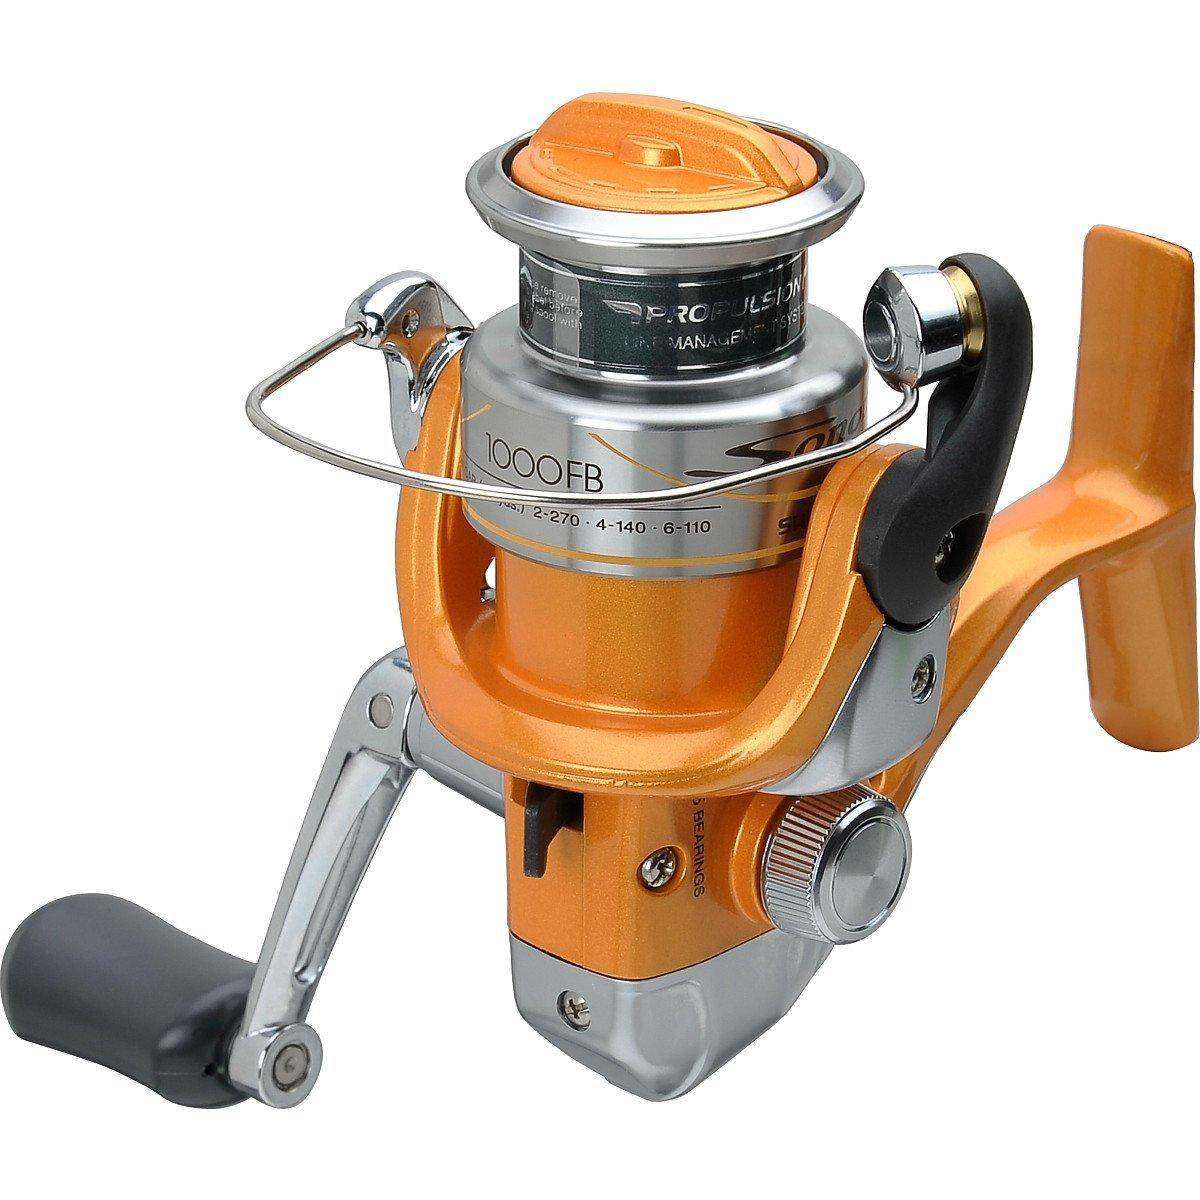 https://www.outdoorshopping.com/pimages/shimano-sonora-spinning-reel-1000-fb-propulsion-line-management-system-130885465749058642.jpg